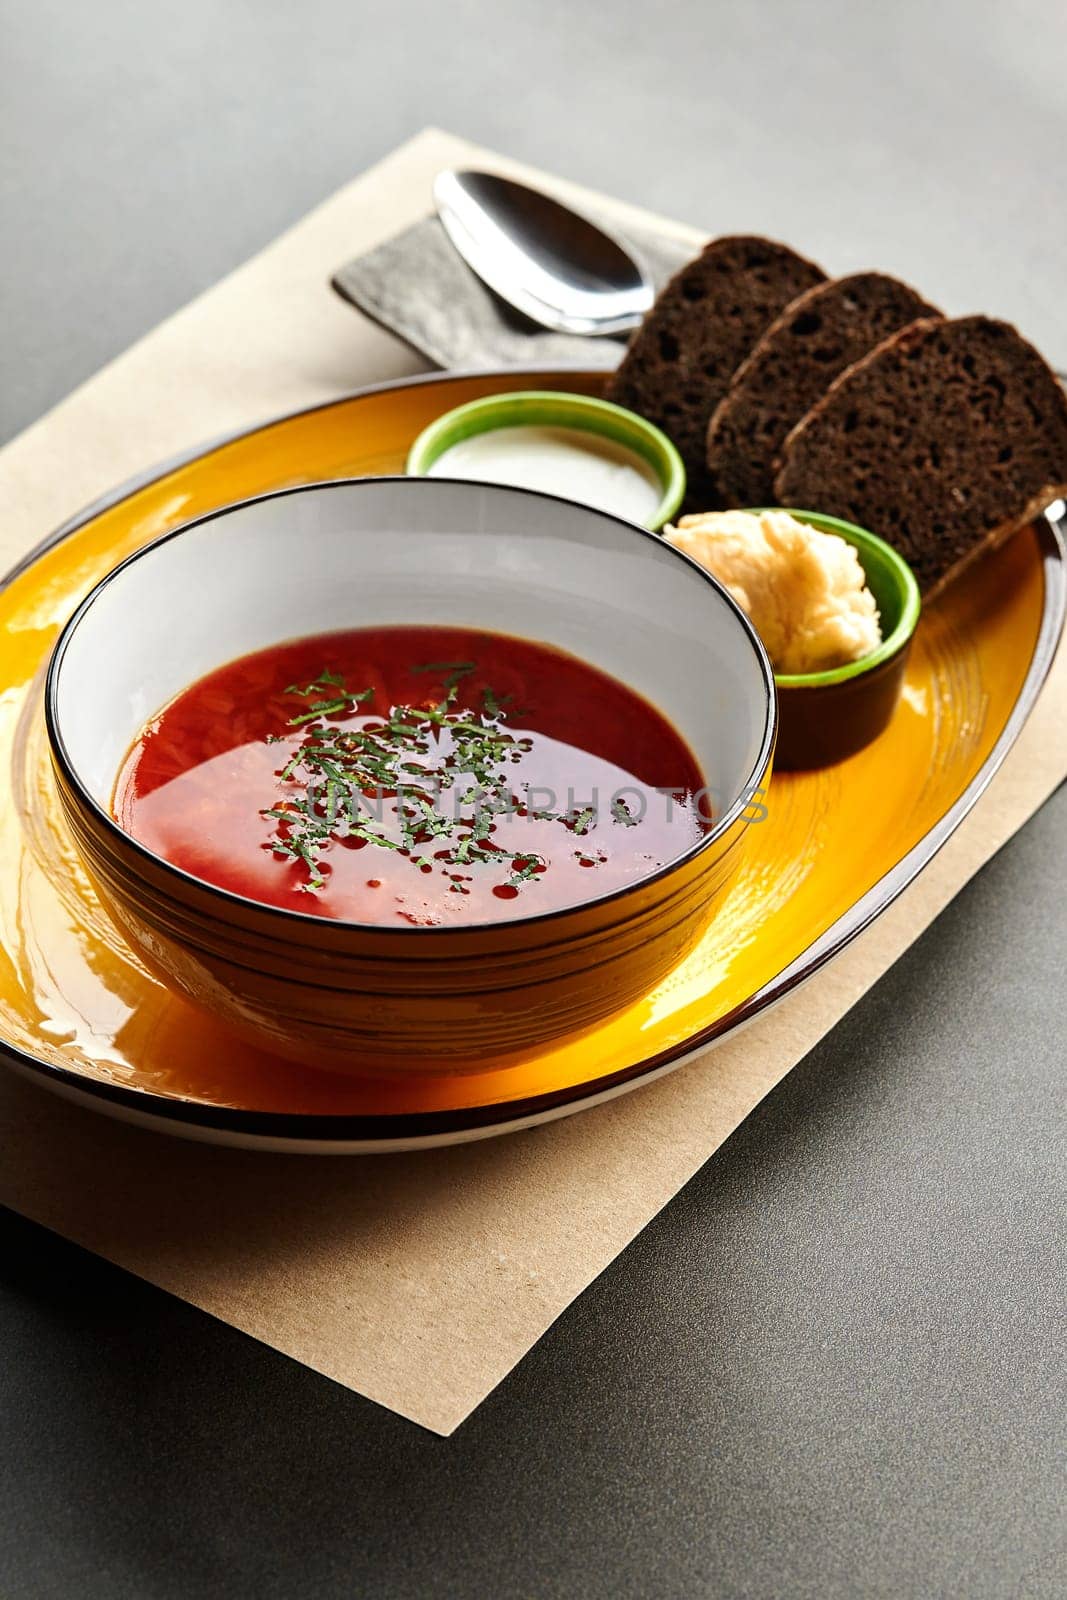 Elegant presentation of classic borscht soup sprinkled with chopped greens served on yellow tray and paper placemat with dark rye bread, sour cream, and condiments. Traditional Ukrainian dish